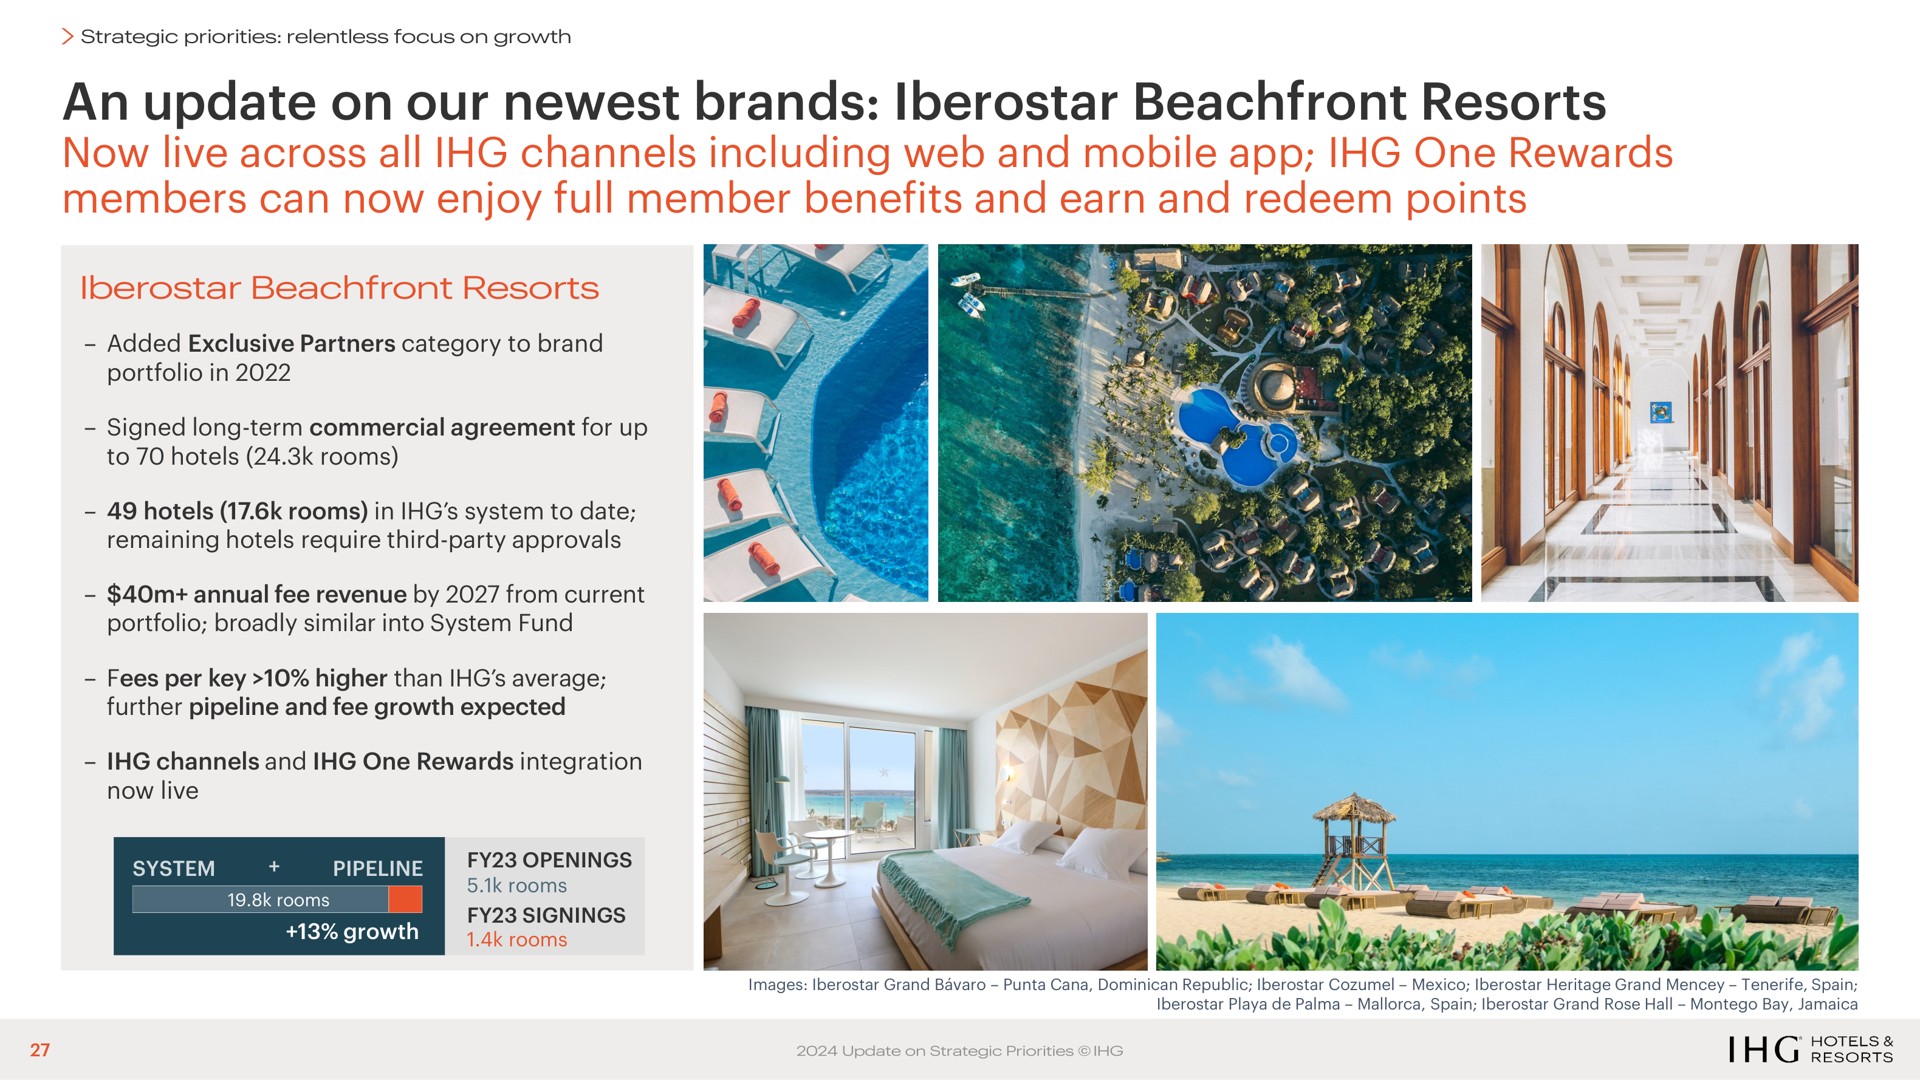 an update on our brands resorts now live across all channels including web and mobile one rewards members can now enjoy full member benefits and earn and redeem points | IHG Hotels